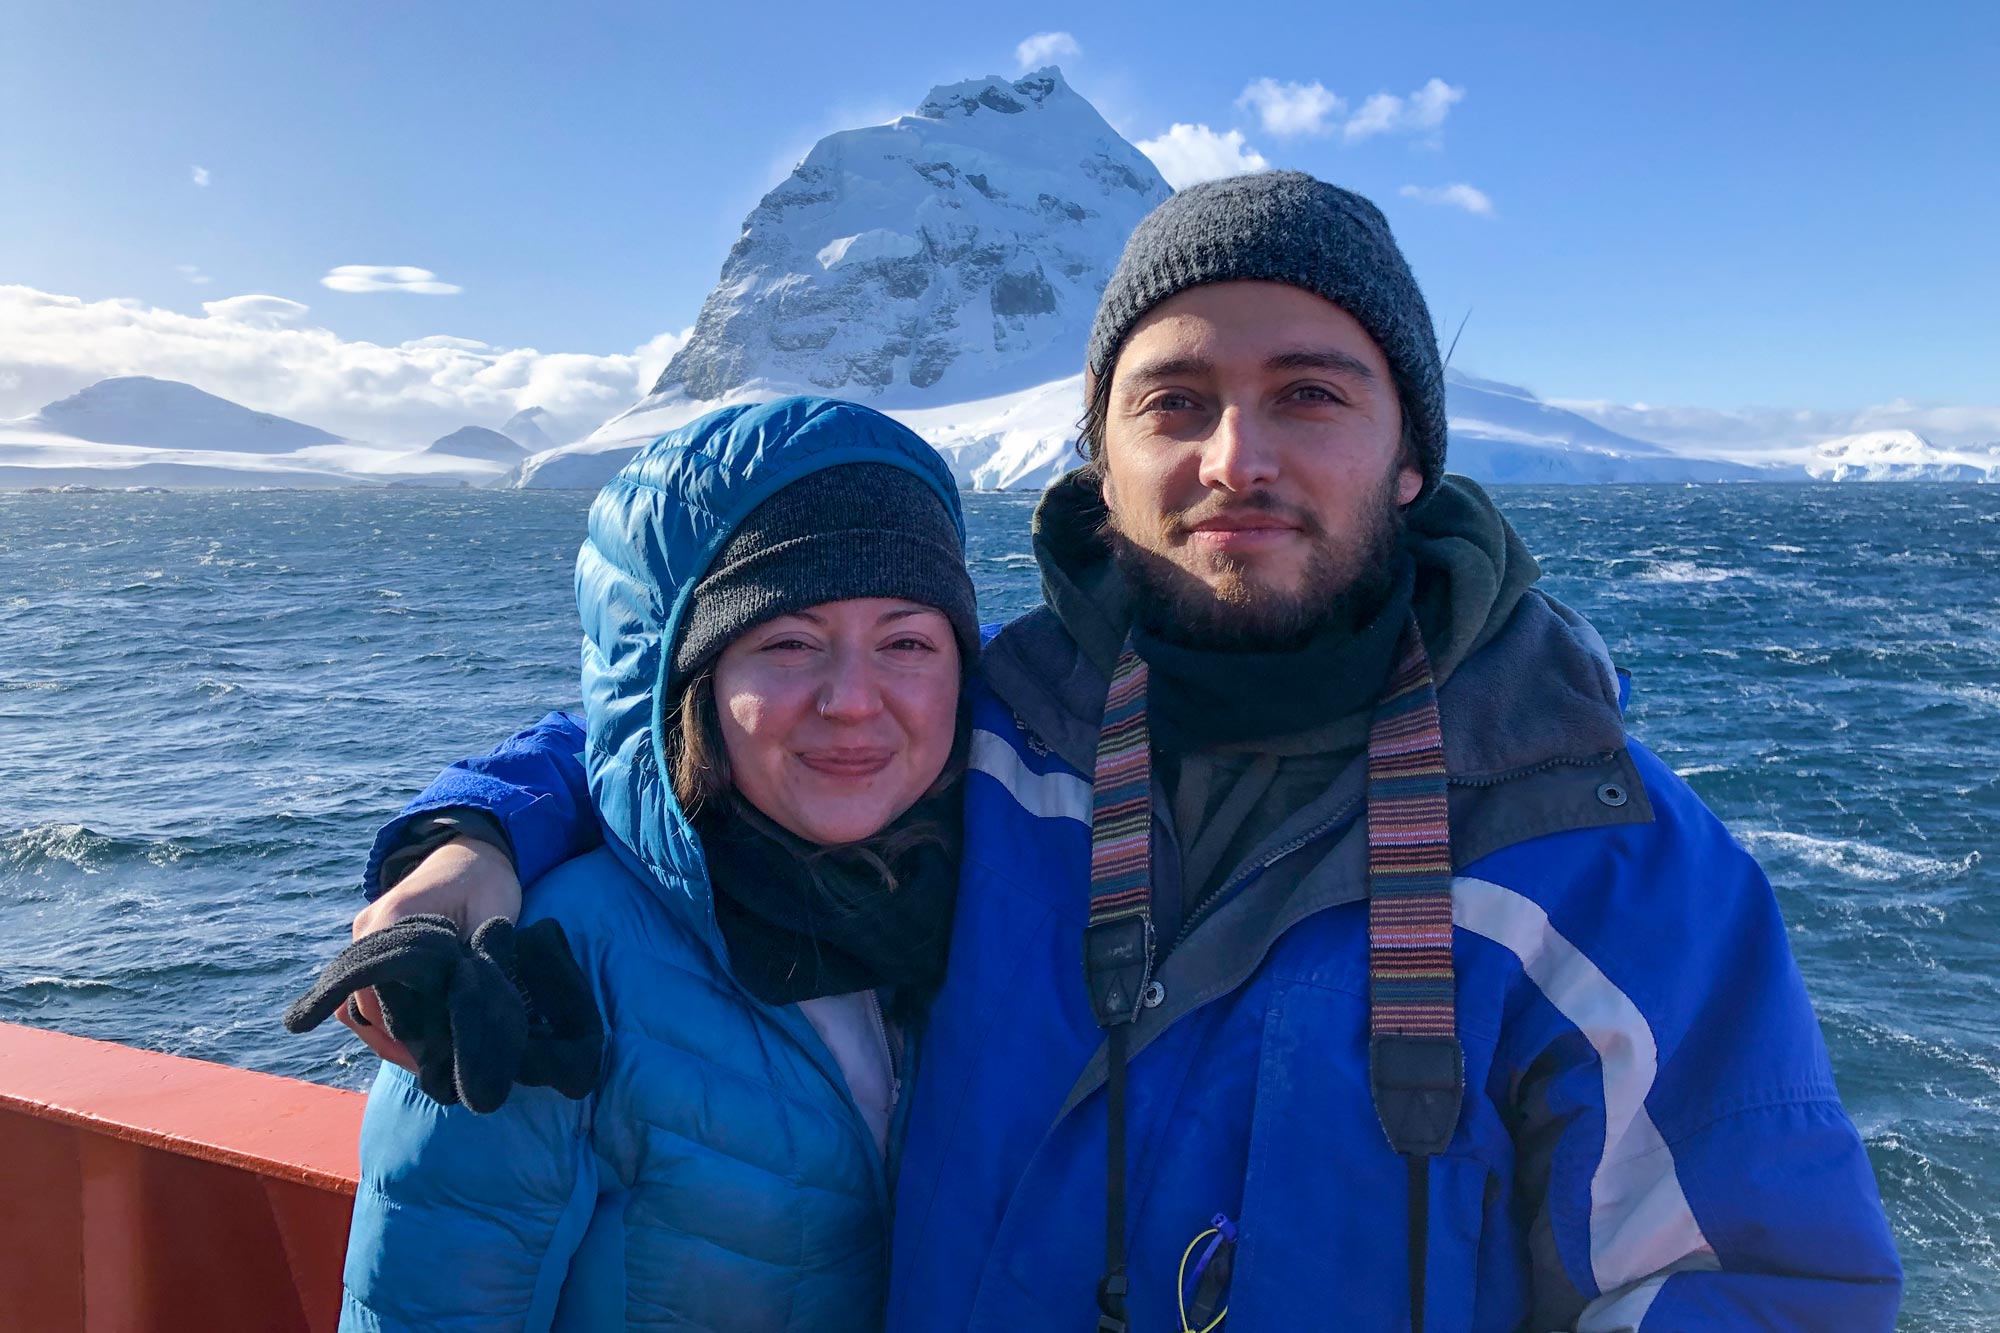 Allison Lepp and Santiago Munevar stand on a boat and pose for a photo in front of a glacial peak across the water